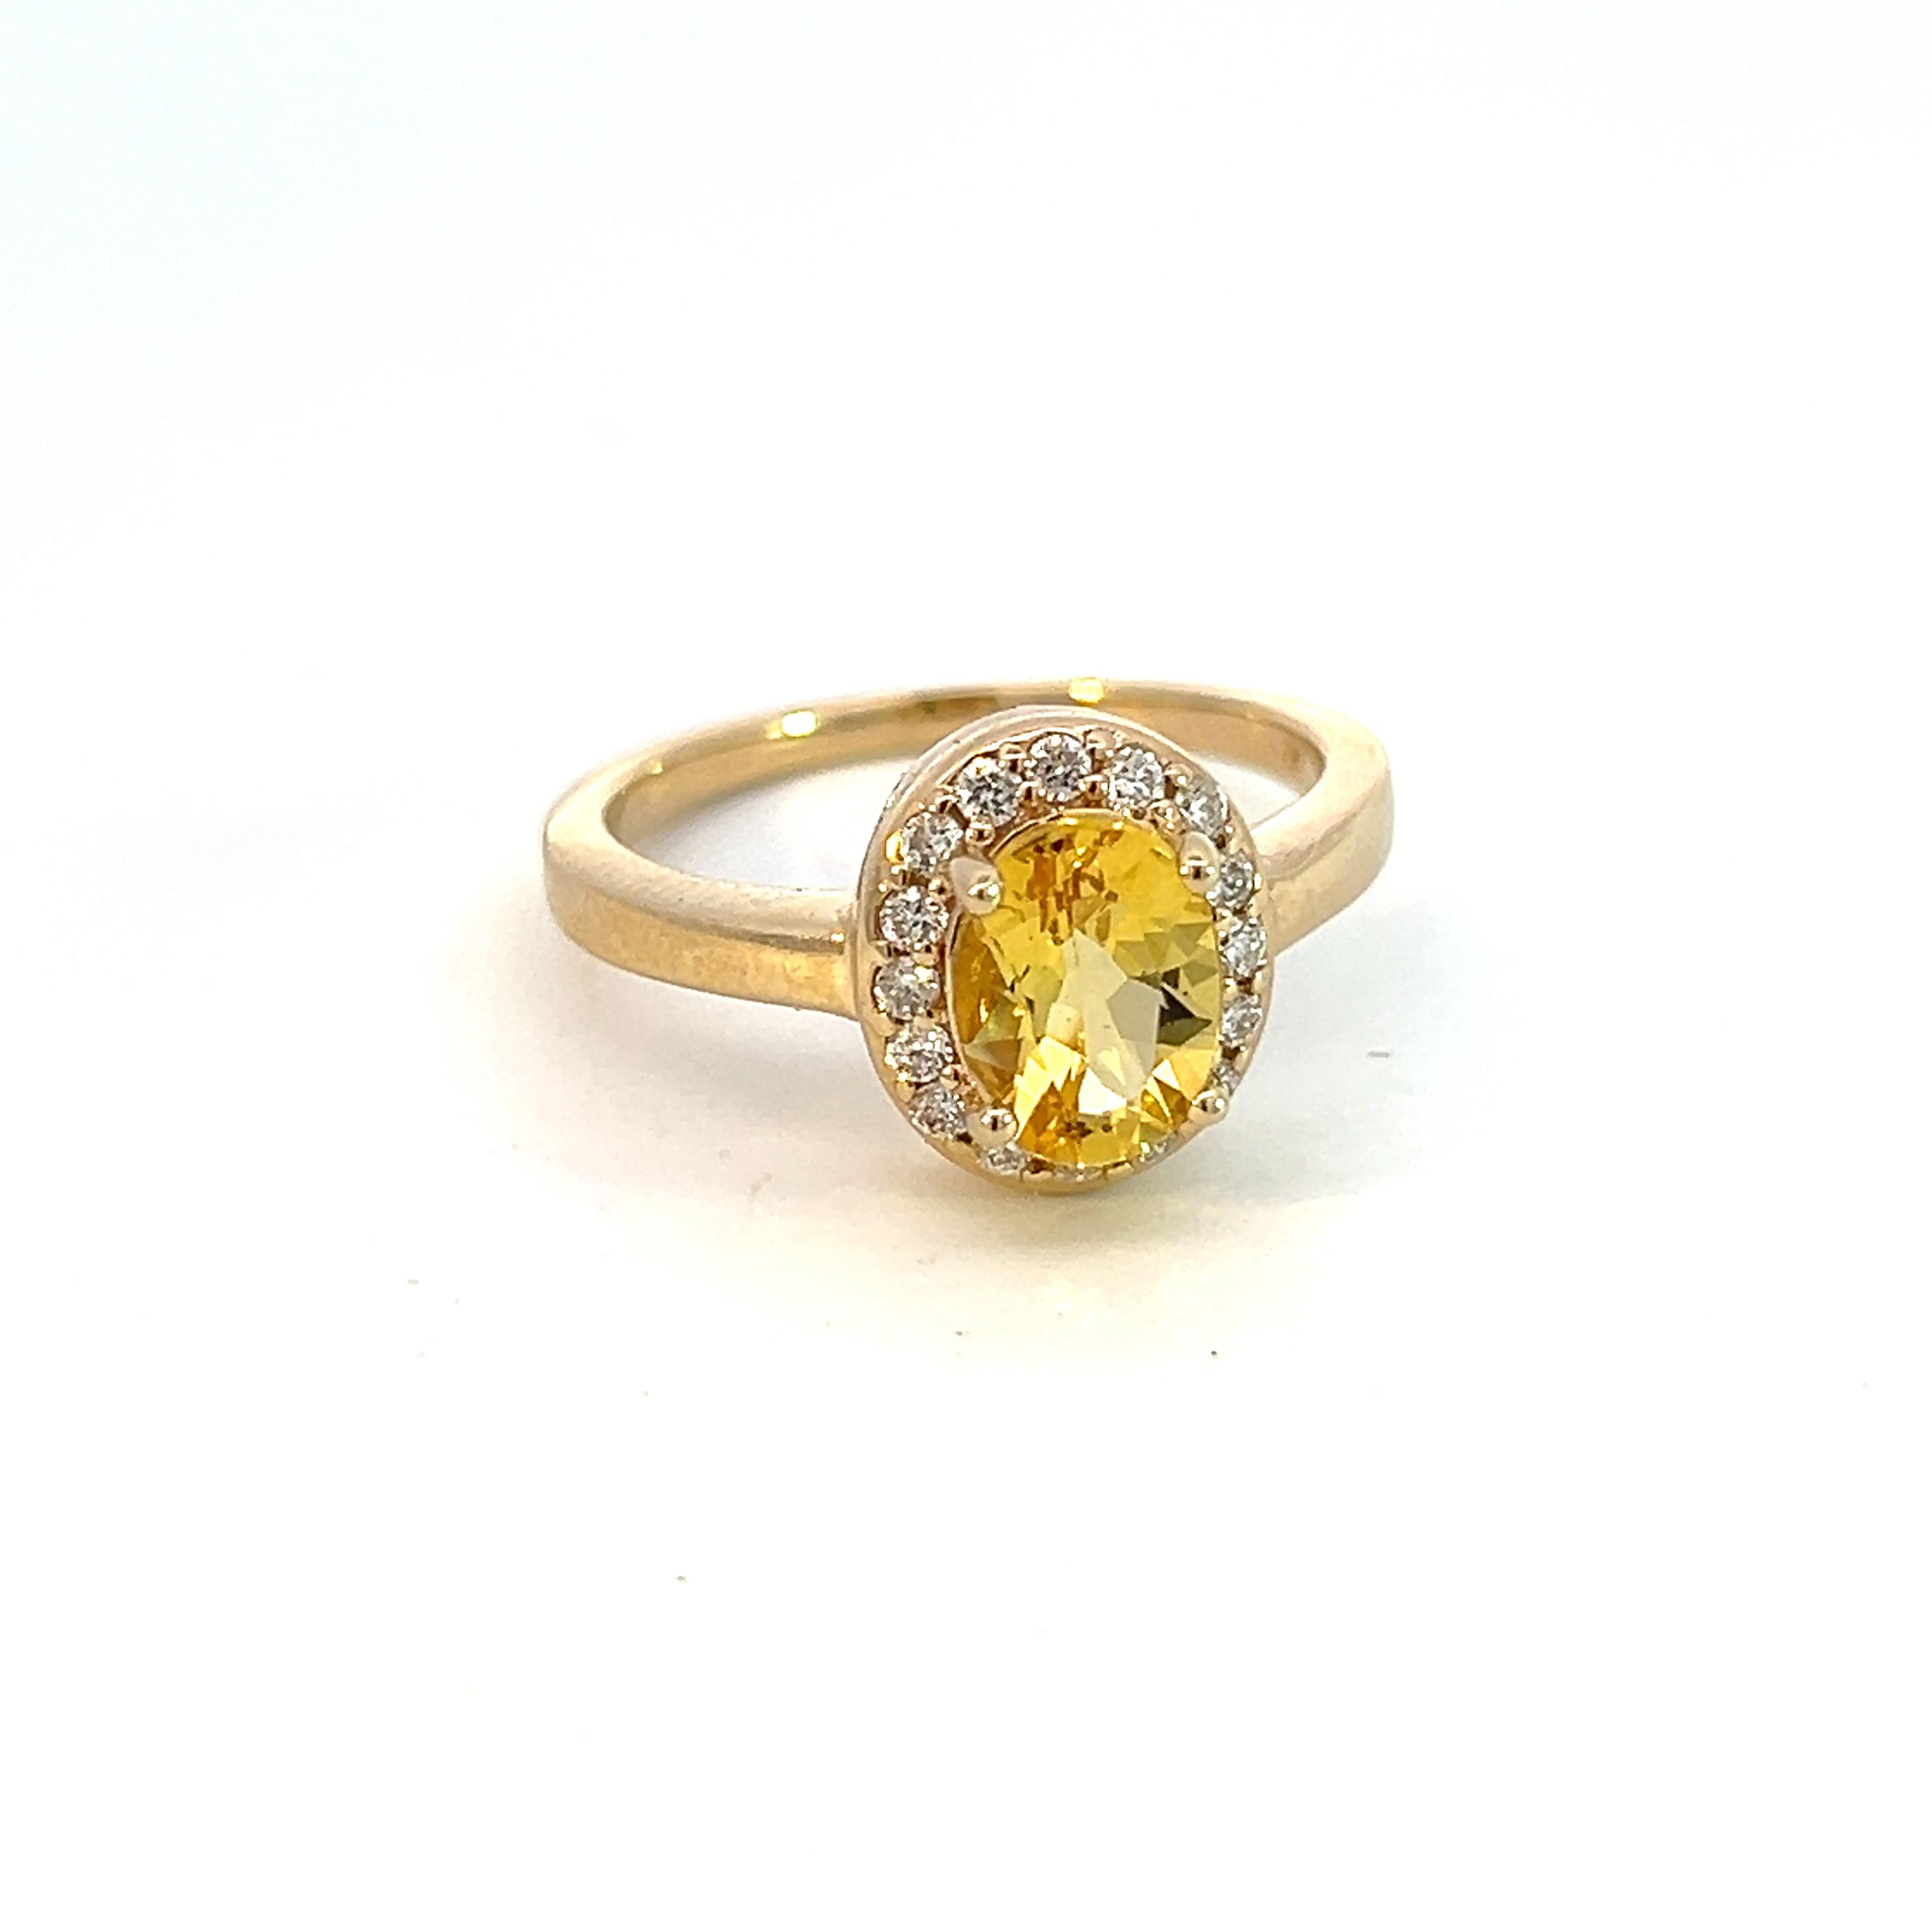 Natural Citrine Diamond Ring 6.5 14k Yellow Gold 1.74 TCW Certified For Sale 2